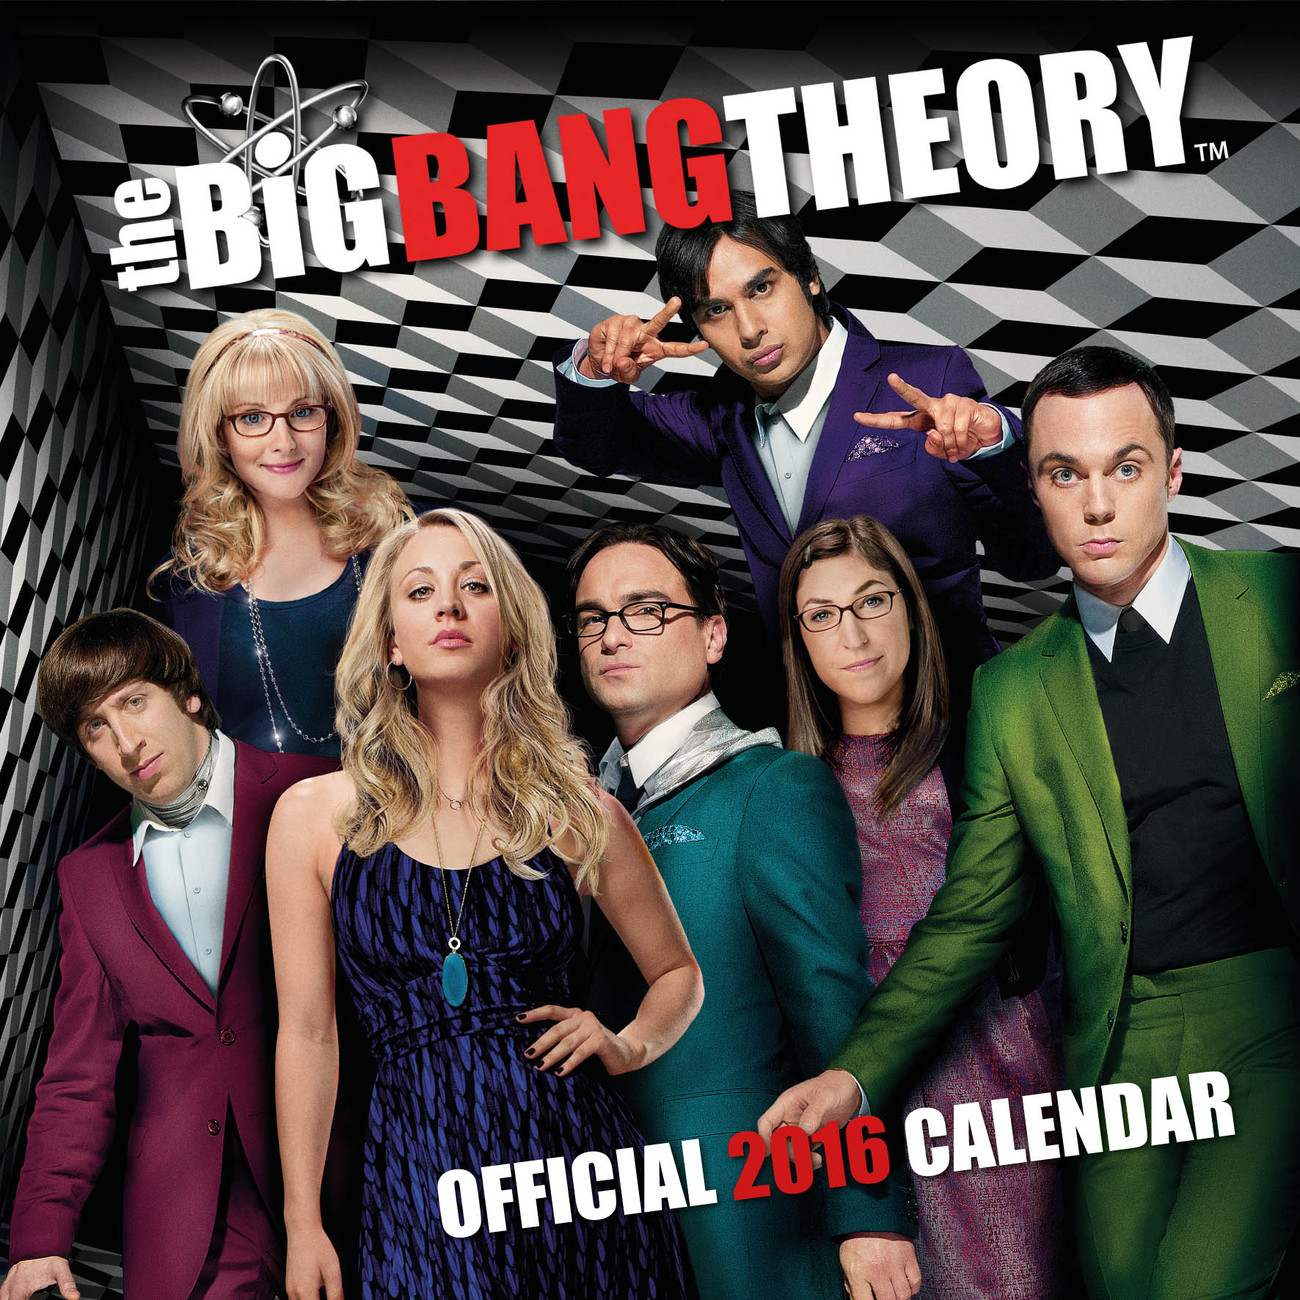 the-big-bang-theory-calendars-2019-on-ukposters-abposters